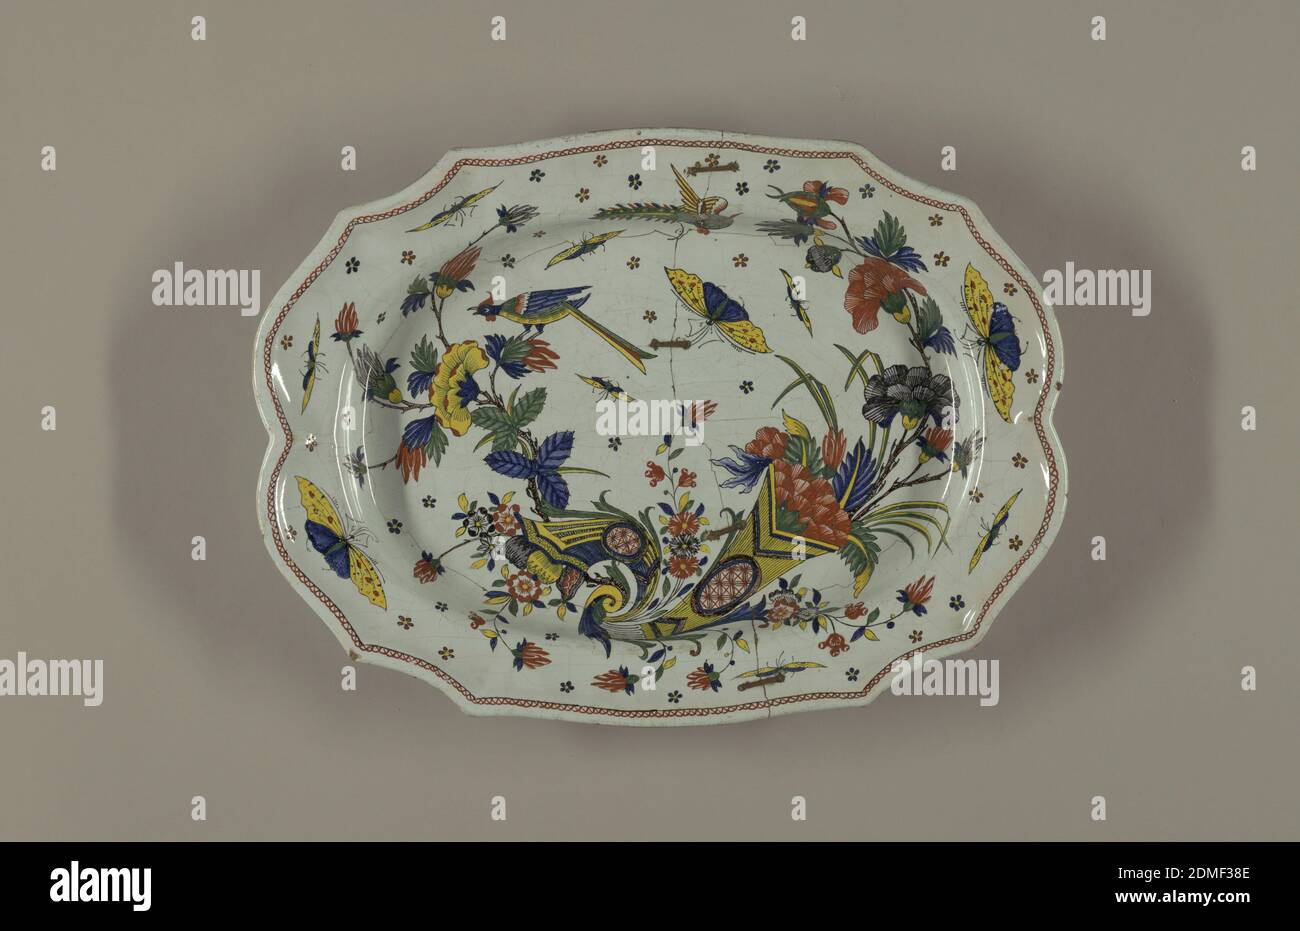 Platter, Tin-glazed earthenware, Irregular scalloped border, oval cavetto. Decoration in Chinese style. Double cornucopia with flowers, large insects and a long-tailed bird, possibly Sinceny, France, possibly Rouen, France, mid- 18th century, ceramics, Decorative Arts, Platter Stock Photo